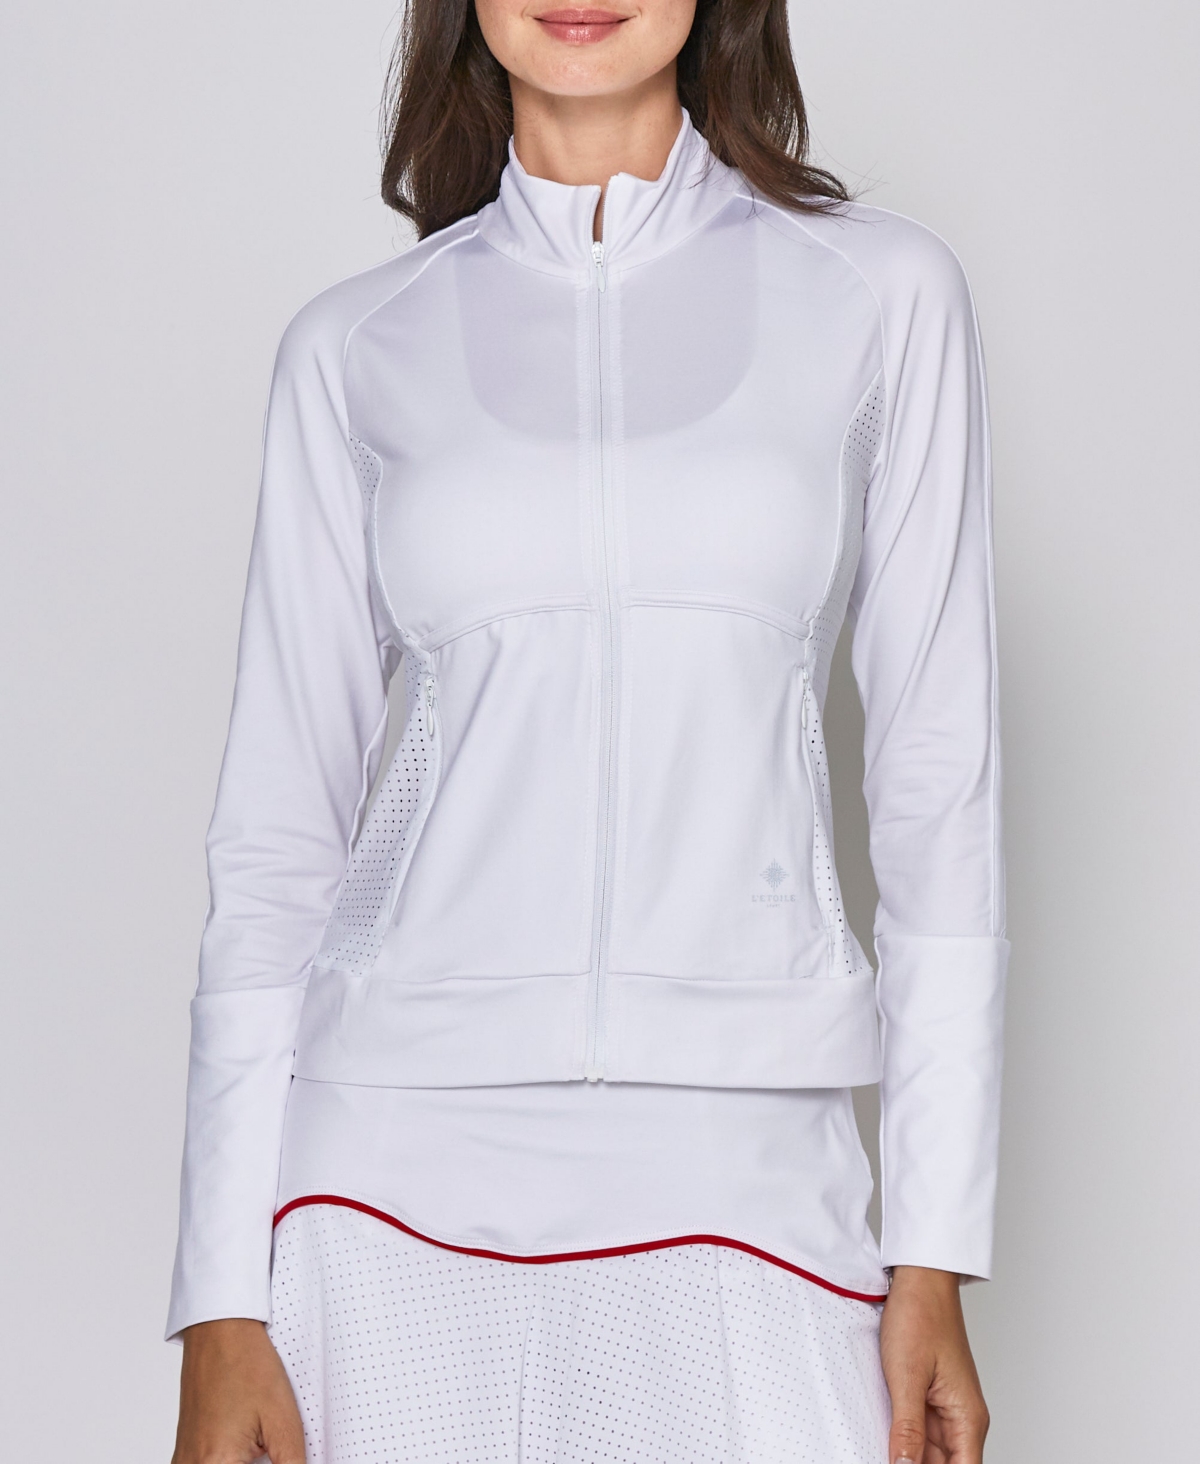 Women's Performance Full-Zip Jacket - White with red trim